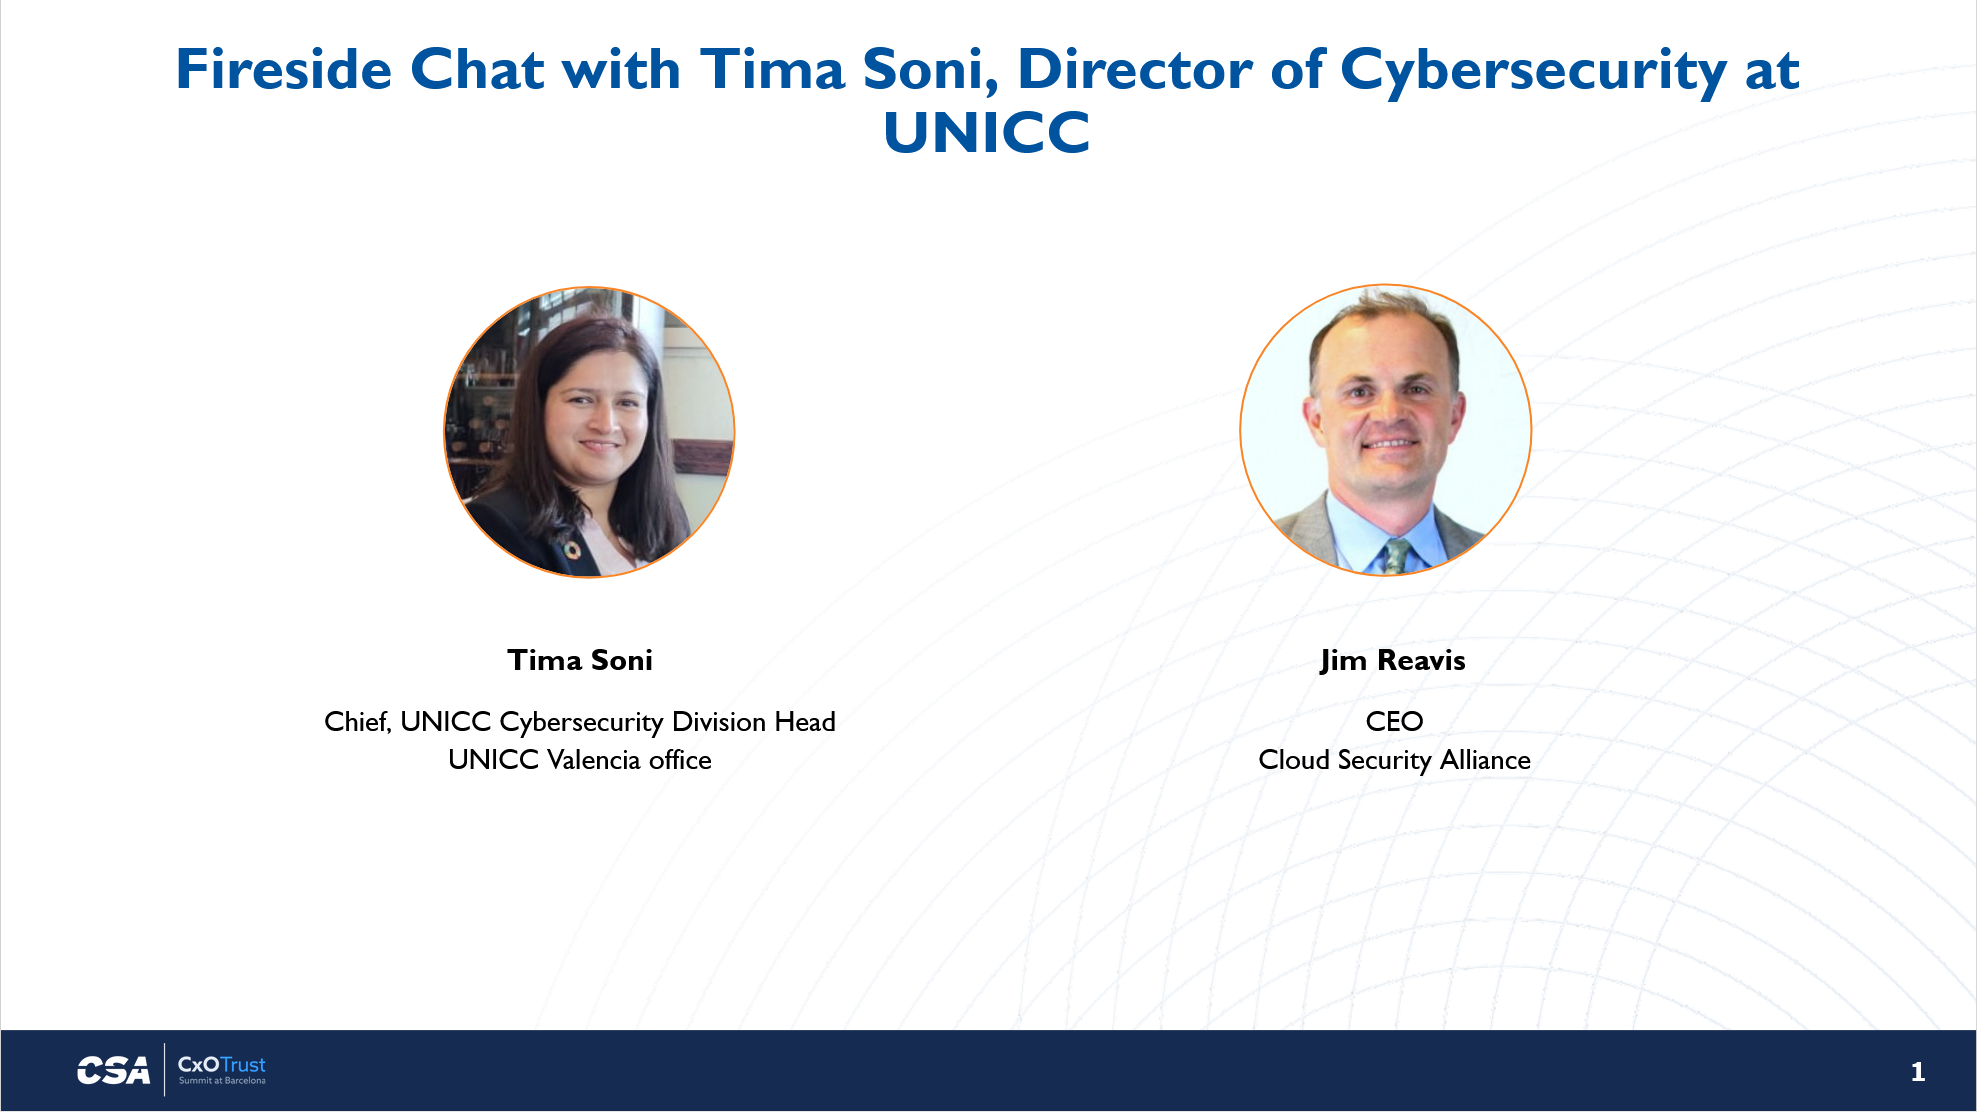 Fireside Chat with Tima Soni, Director of Cybersecurity at UNICC